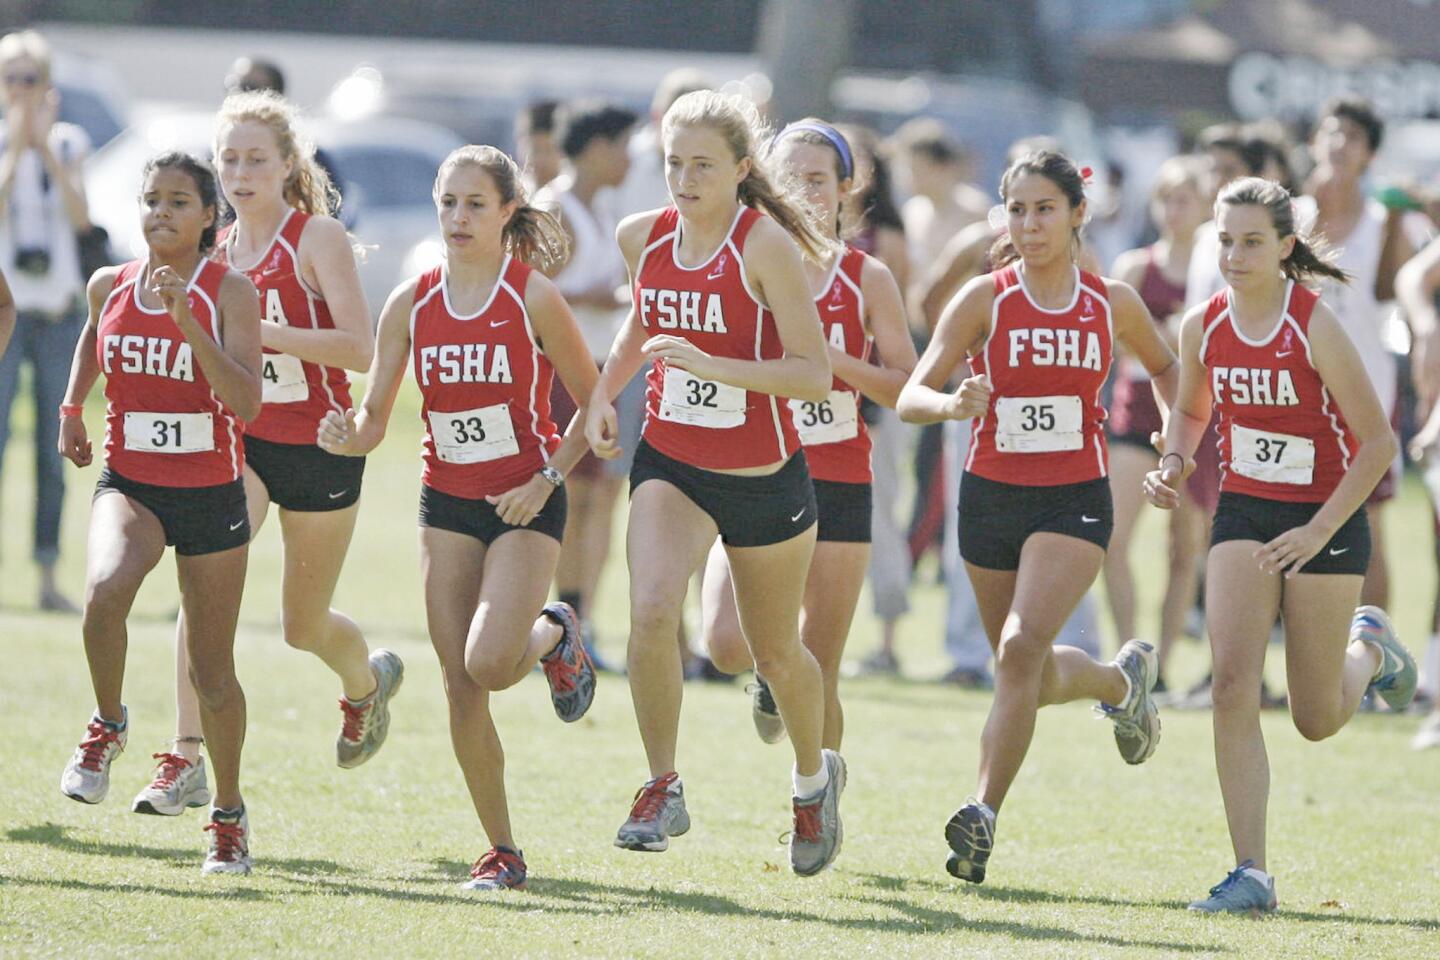 FSHA runners participate in a meet at Balboa Park in Encino on Thursday, October 4, 2012.